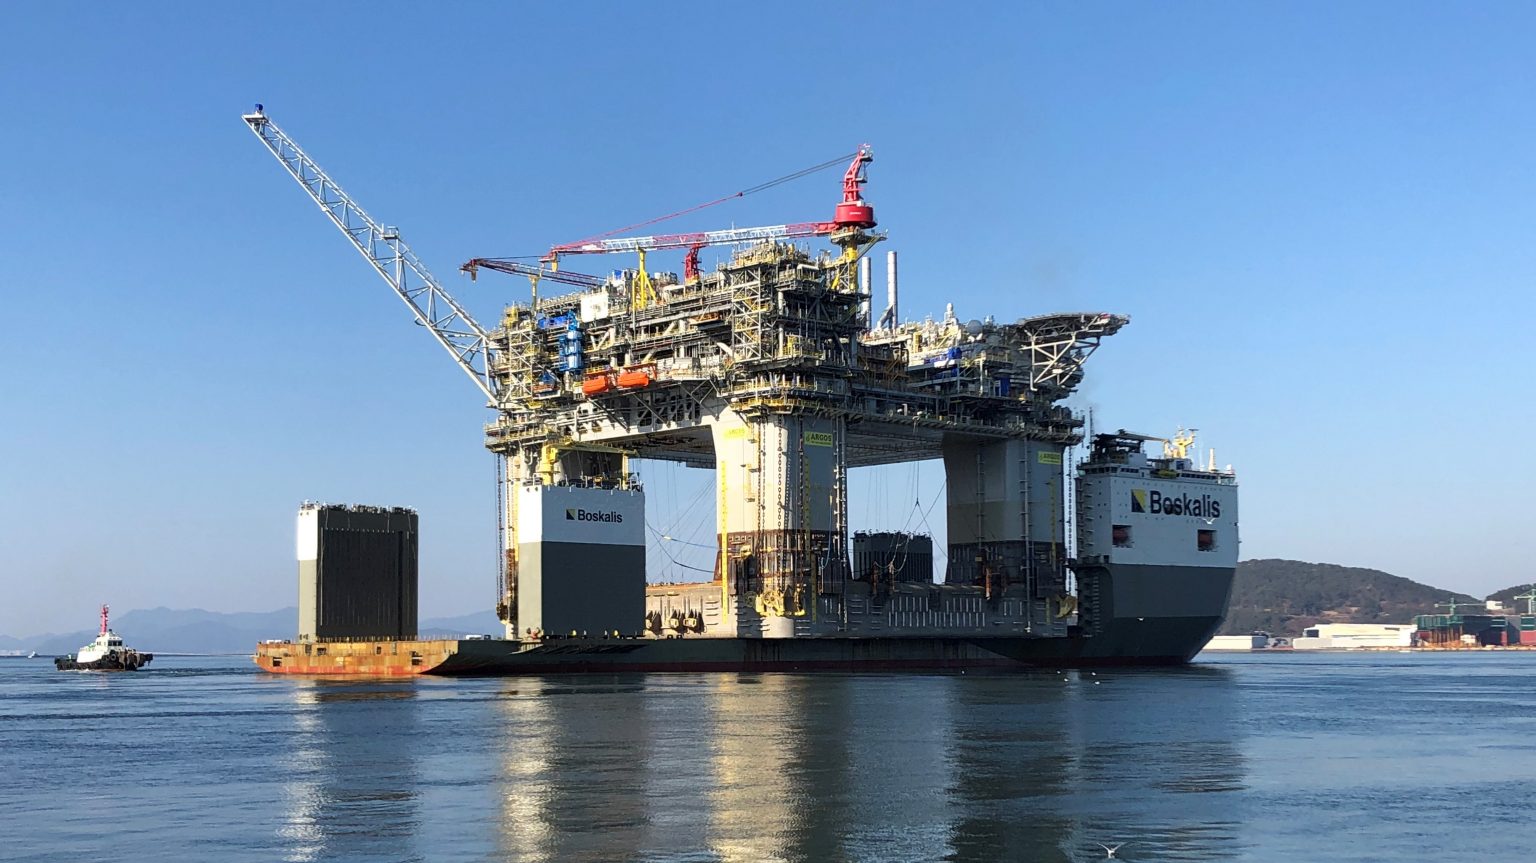 BP's Argos FPU sailed away from South Korea on the BOKA Vanguard and began the journey to the Kiewit Offshore Services fabrication yard in Ingleside, Texas